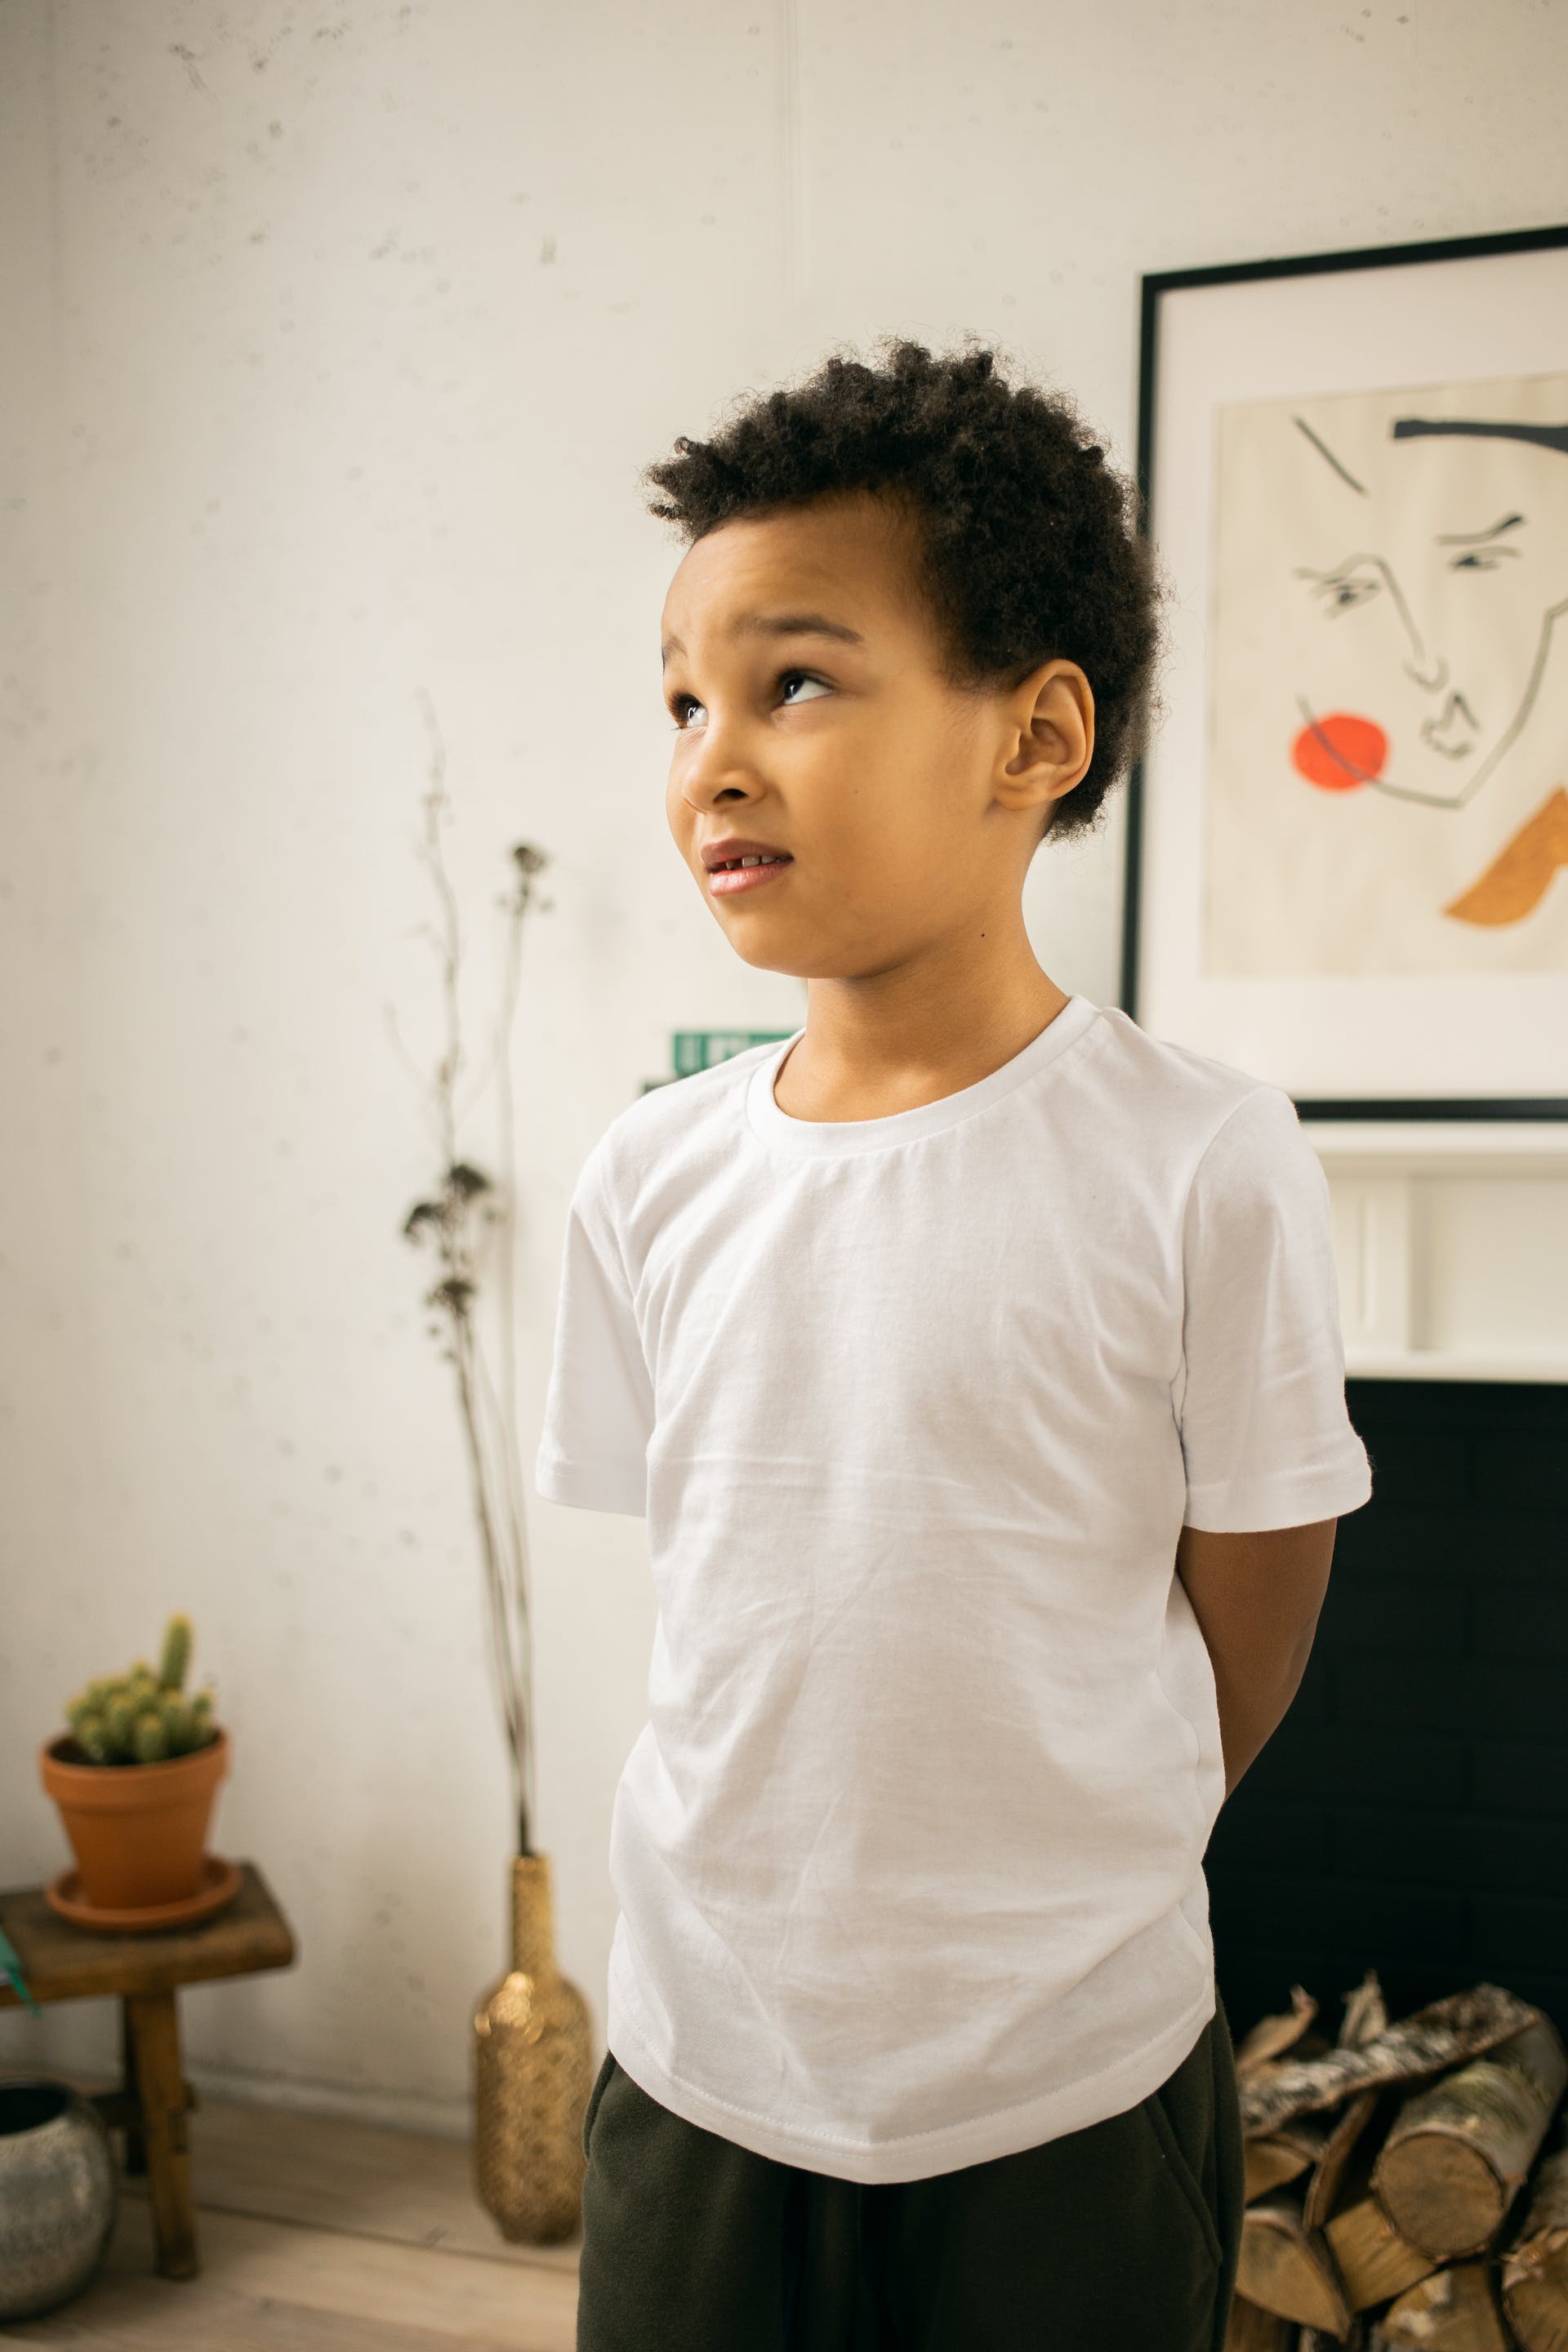 A child standing with his hands behind his back | Source: Pexels